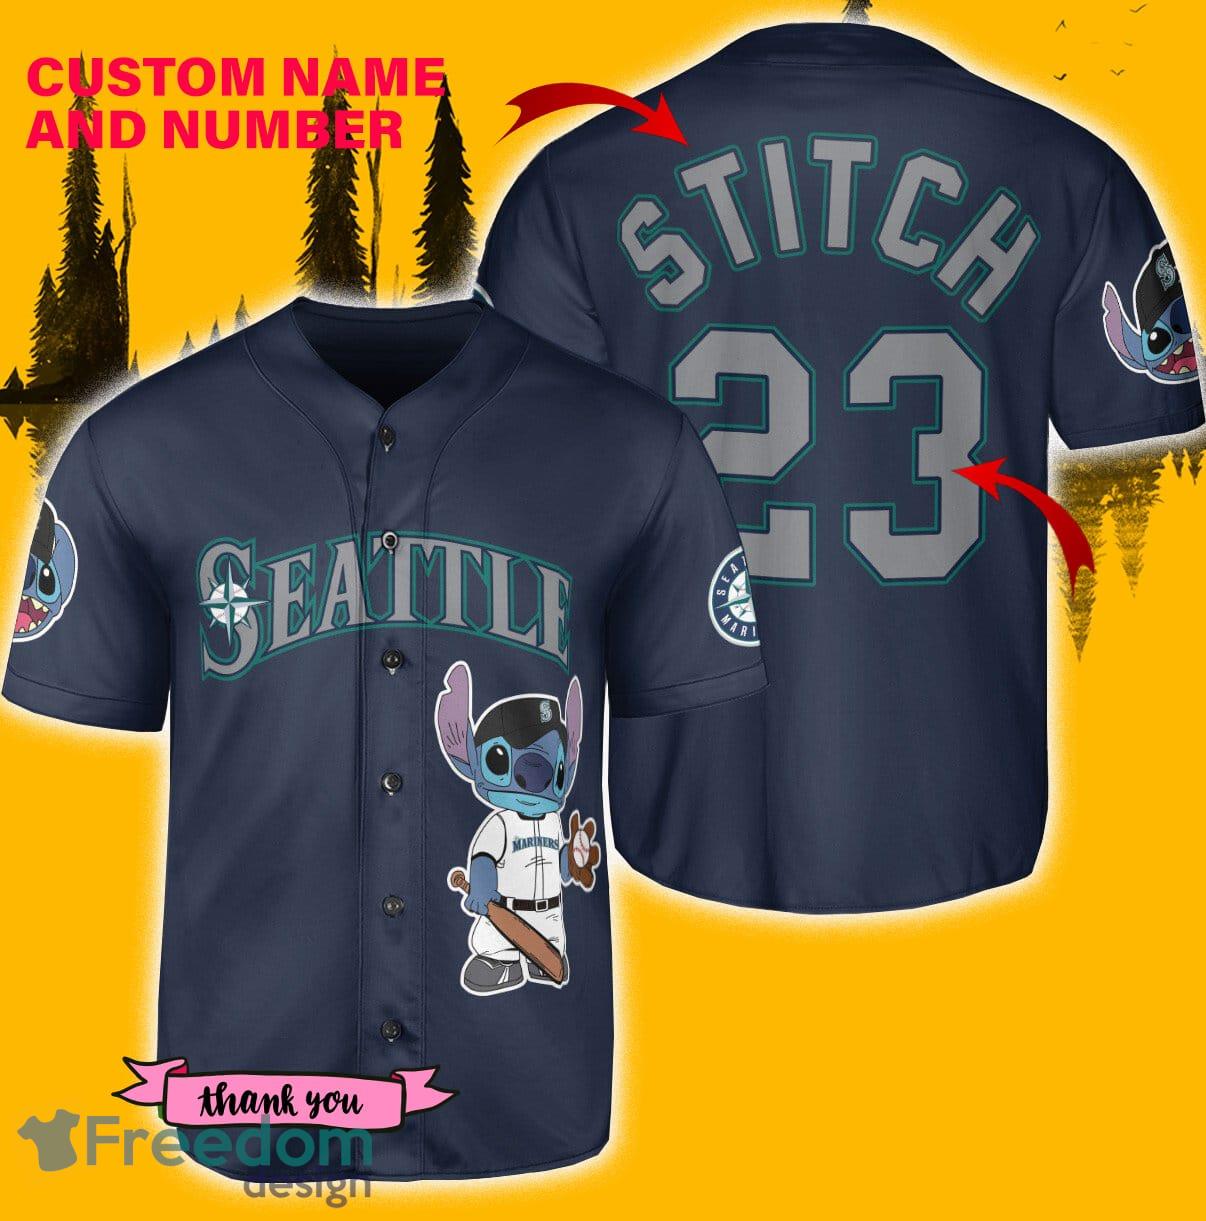 Get Your Seattle Mariners Lilo & Stitch Baseball Jersey - Royal - Scesy